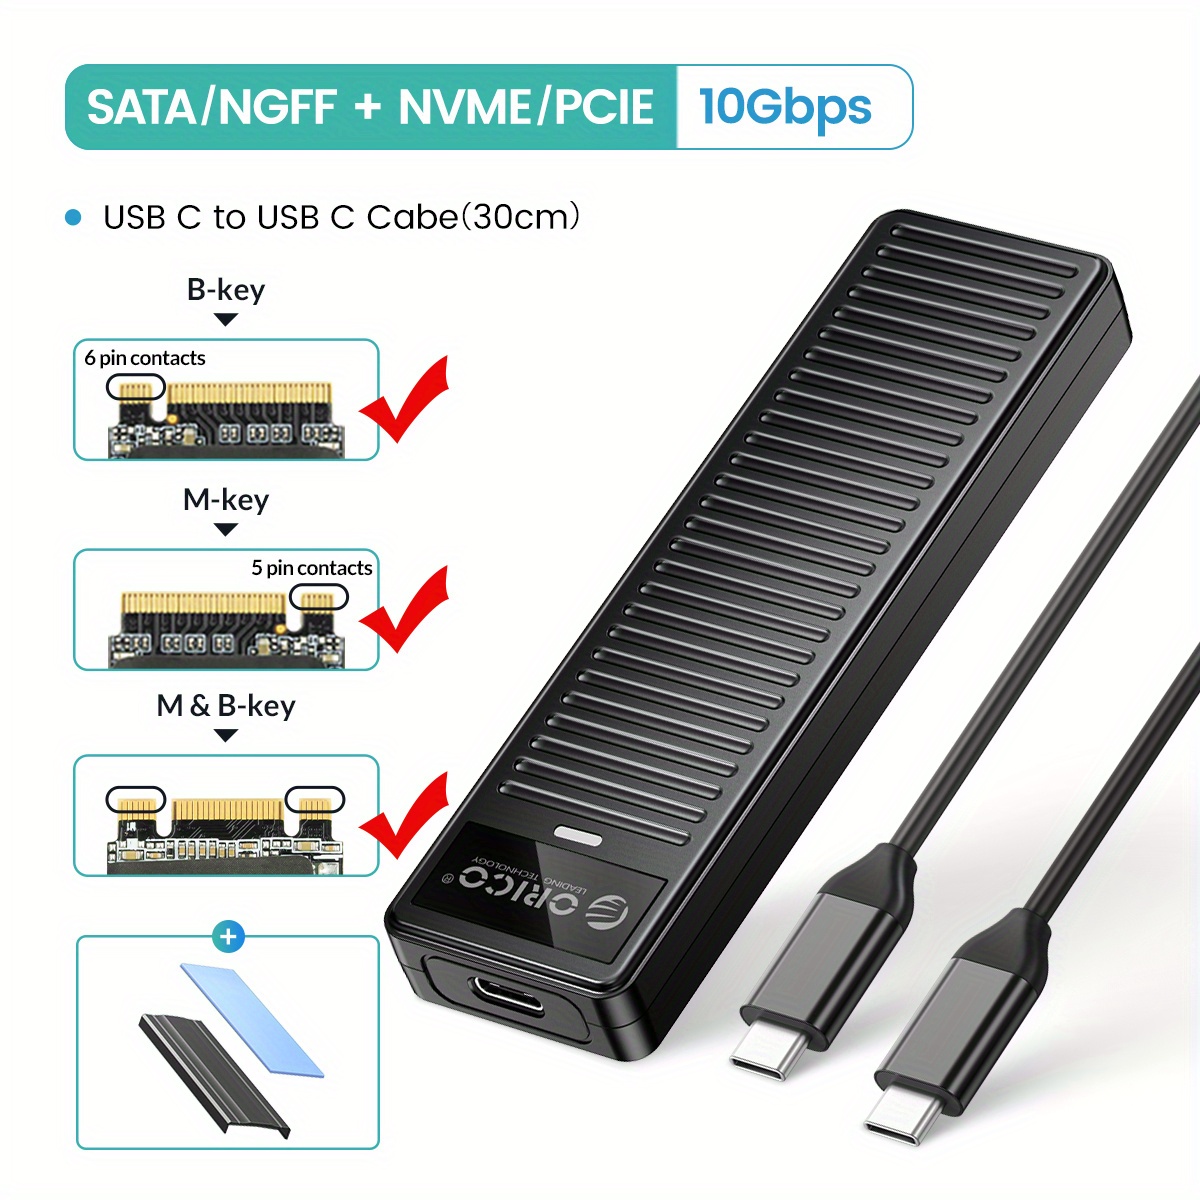 ORICO M.2 NVMe SATA SSD Enclosure, USB 3.1 Gen 2 (10 Gbps) to NVMe PCI-E  M.2 SSD Case Support UASP for NVMe SSD Size 2230/2242/2260/2280 (M.2 NVMe/SATA)  